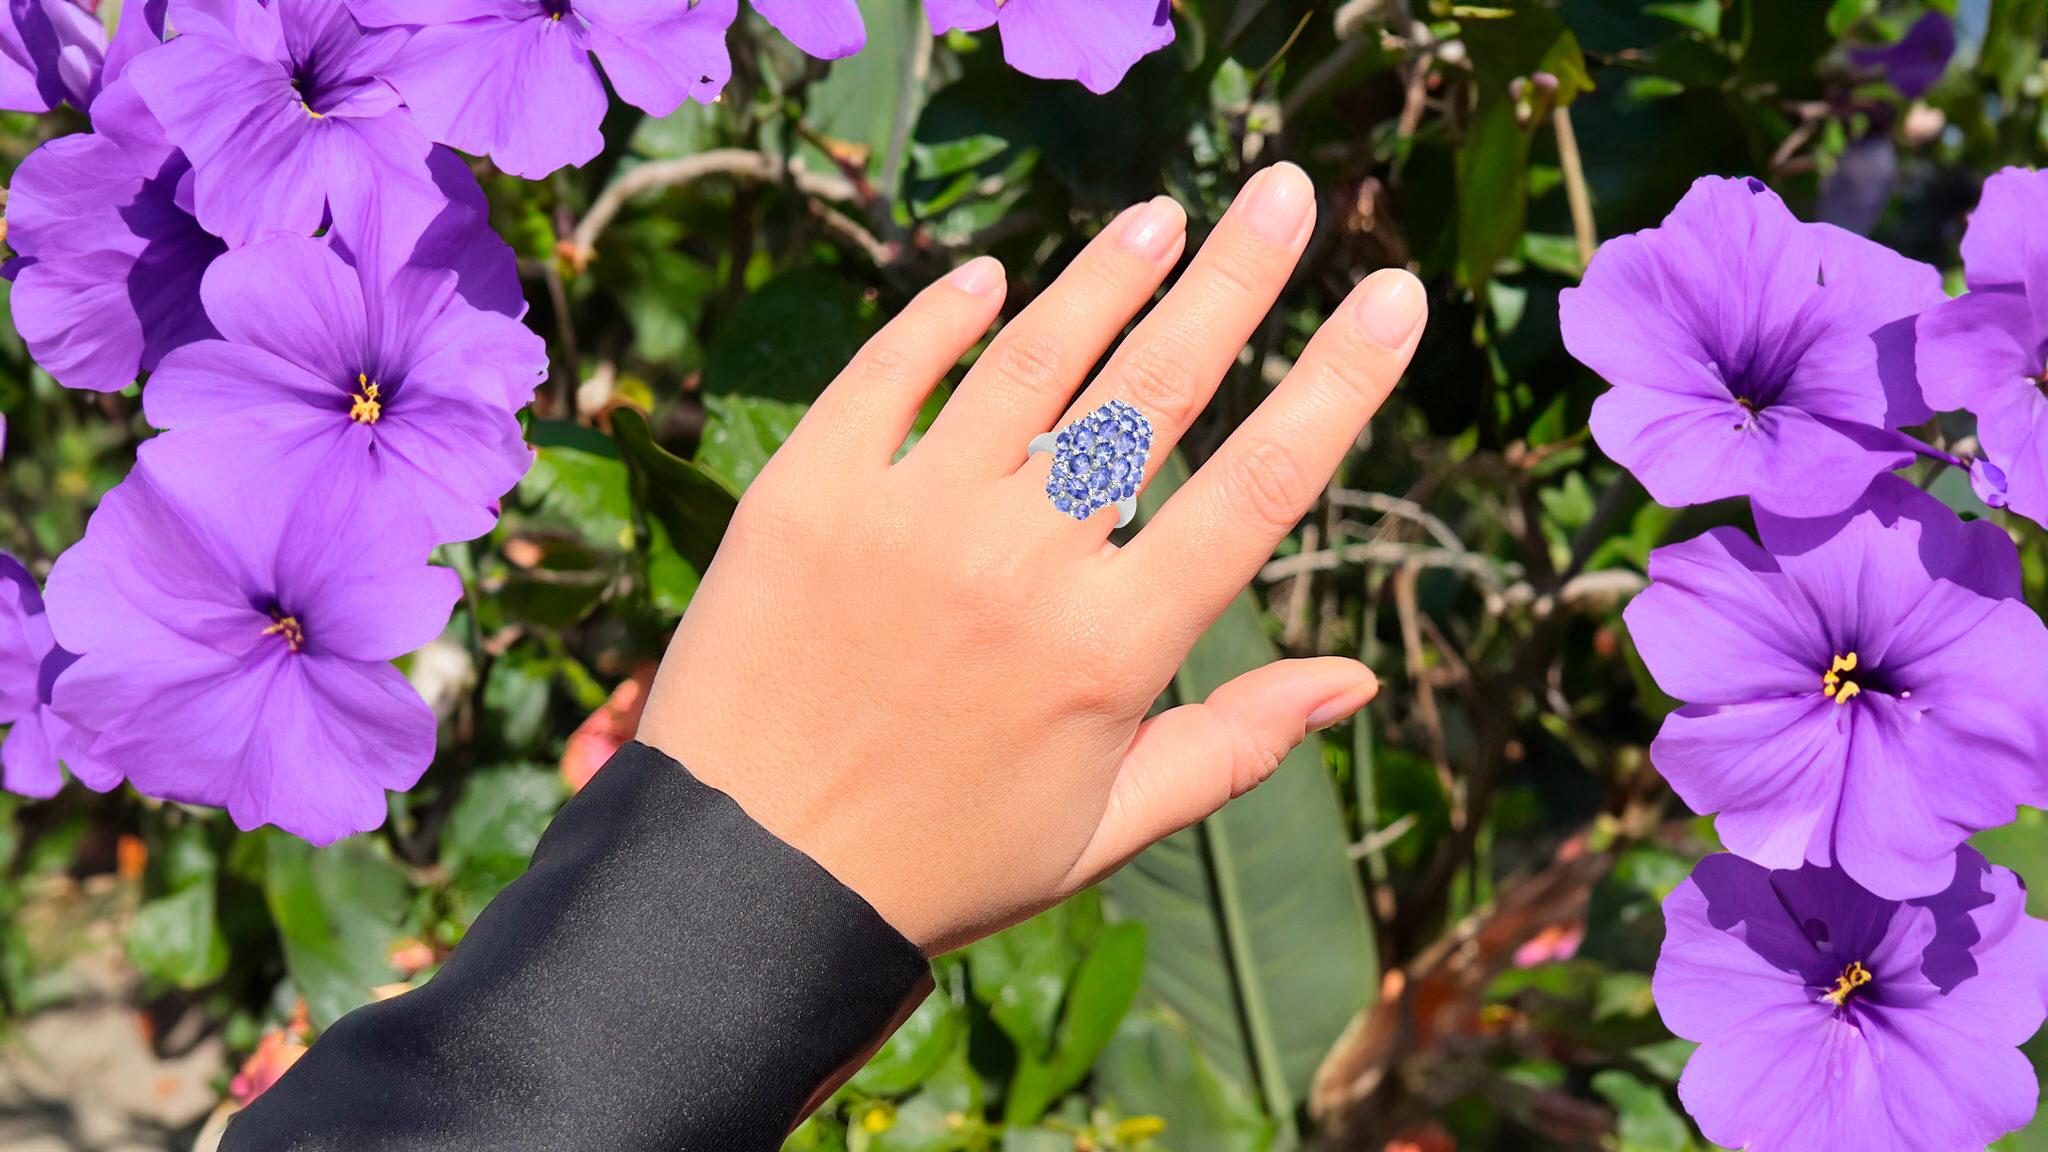 It comes with the Gemological Appraisal by GIA GG/AJP
Tanzanites = 2.50 Carats
Cut: Round, Oval
Total Quantity: 27 Gemstones
Metal: Rhodium Plated Sterling Silver
Ring Size: 8* US
*It can be resized complimentary